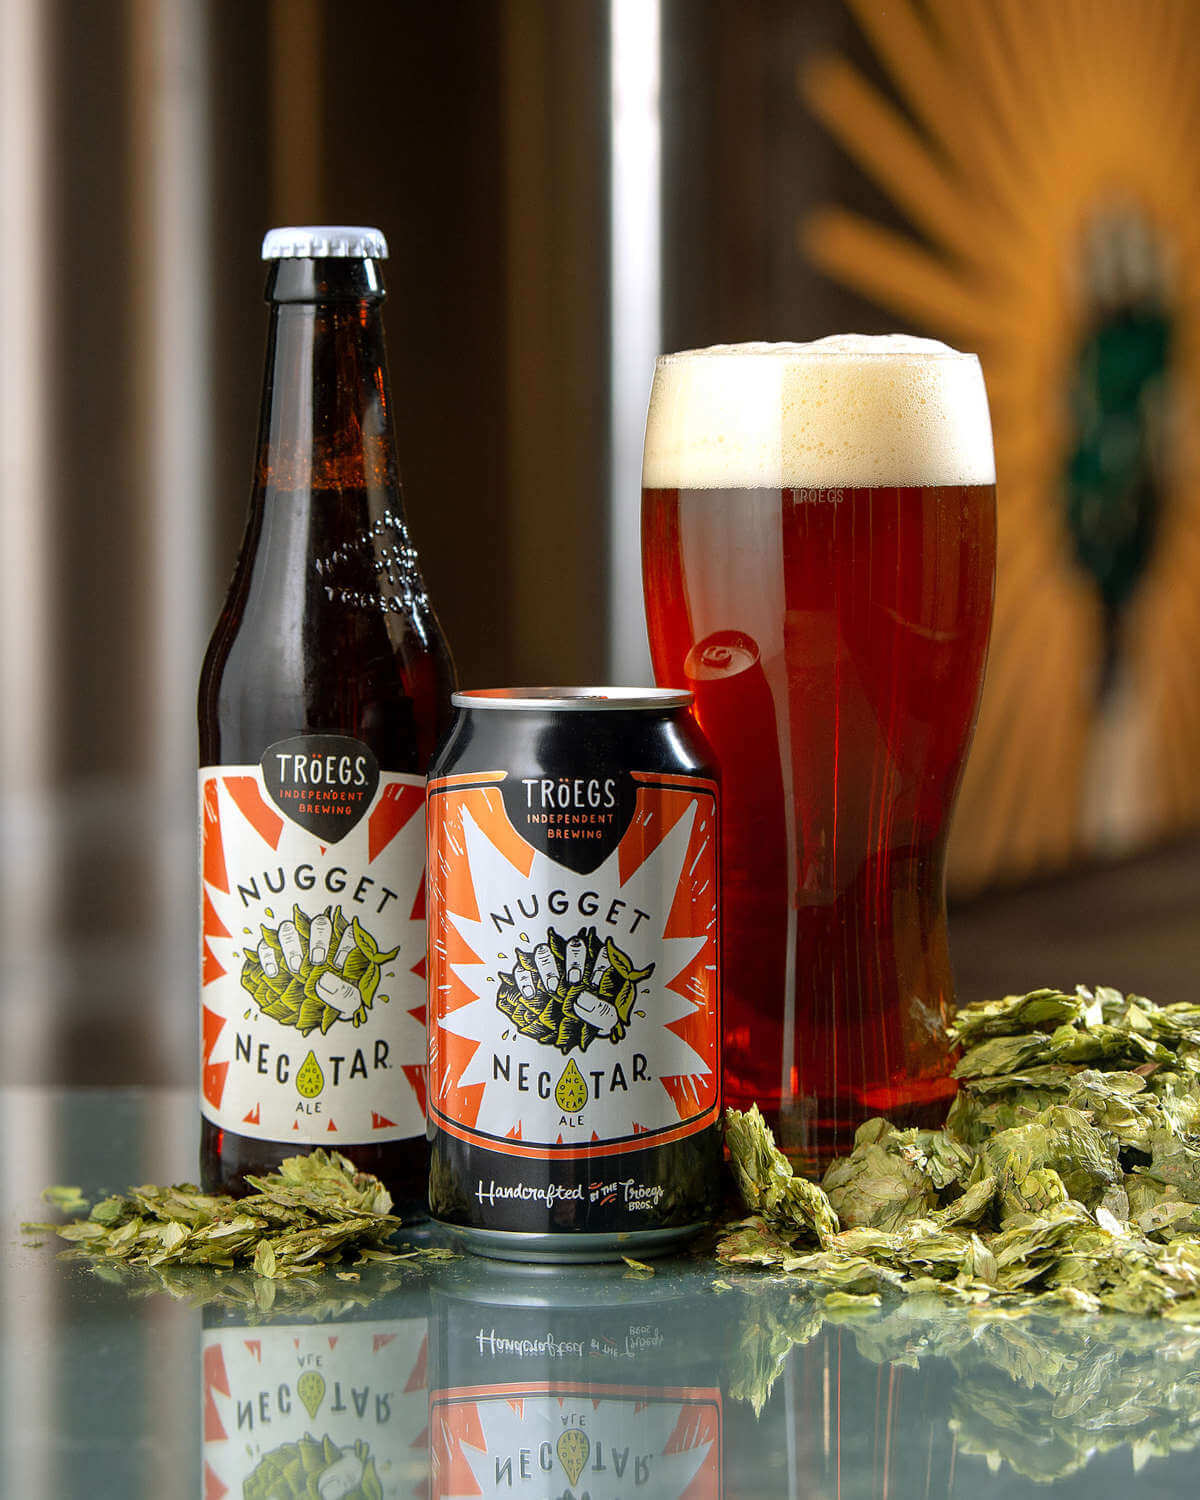 Nugget Nectar returns from Tröegs for 2022